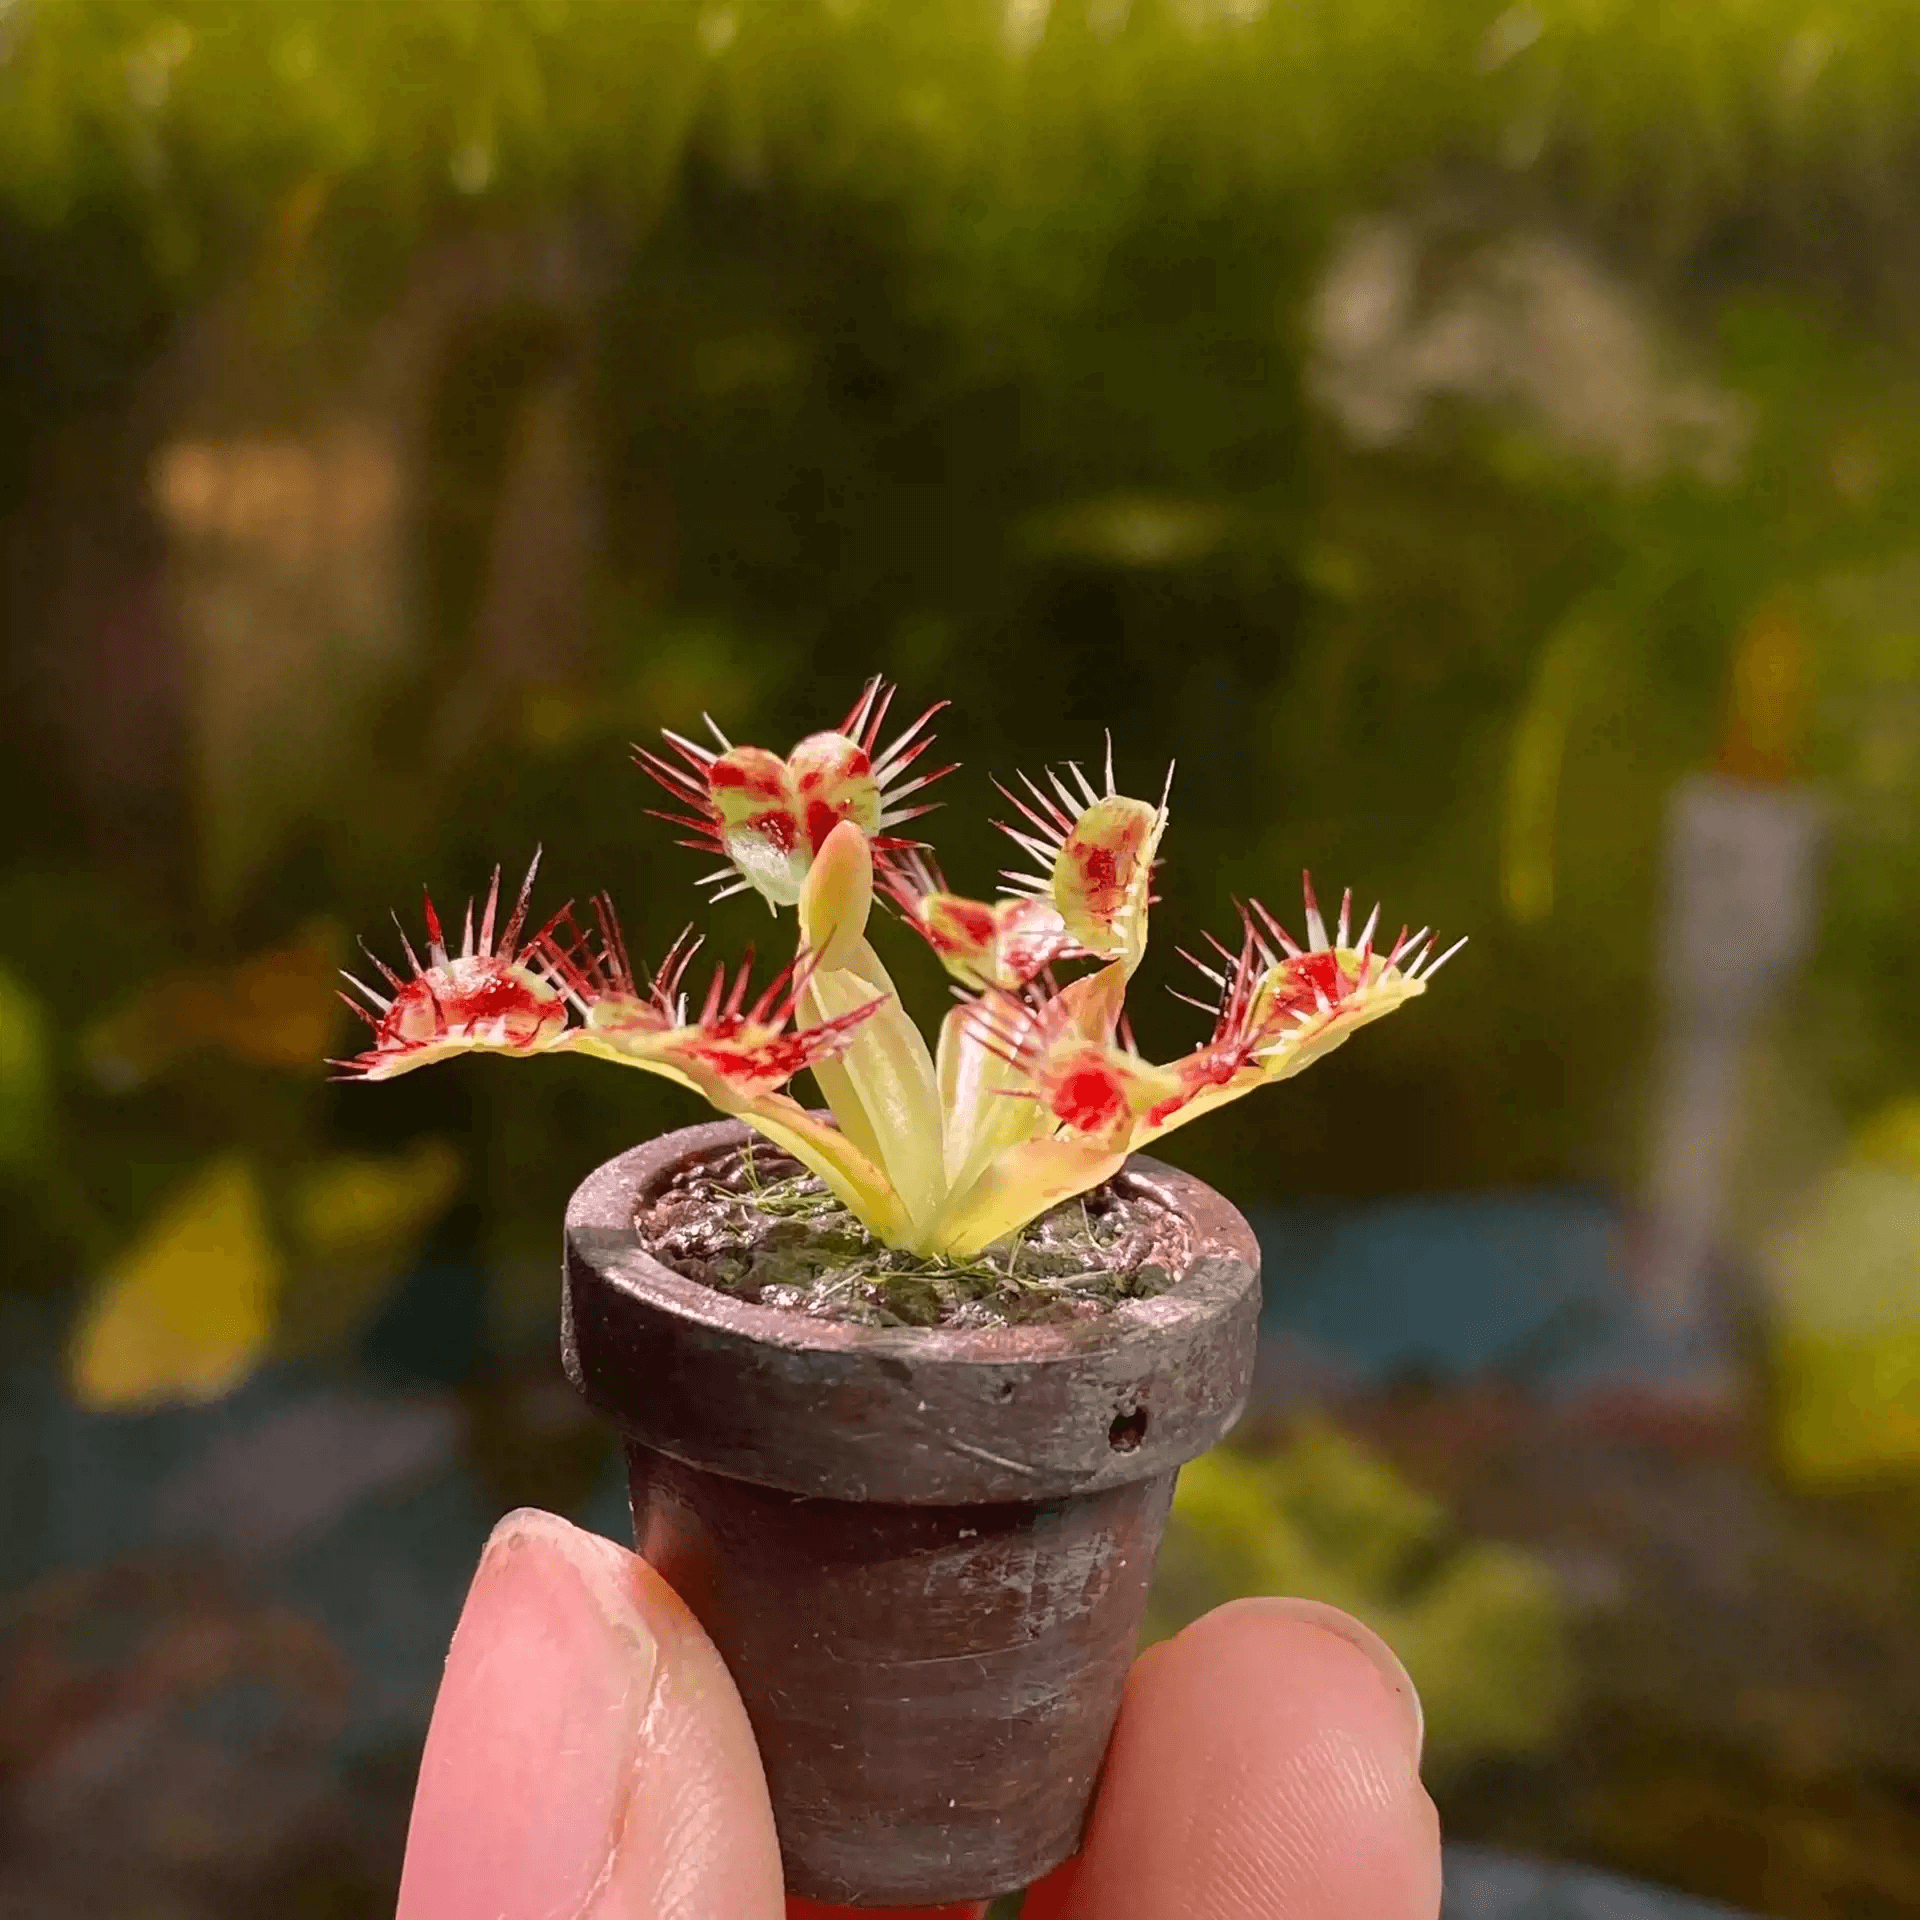 The Venus Flytrap (Dionaea muscipula) is a feisty, flesh-eating plant with toothed leaves like snapping-jaws that trap and devour insects and spiders.  Scale: 1:6; 1:12  Material: Handmade from Clay  Height: 4.5cm / 1.77in